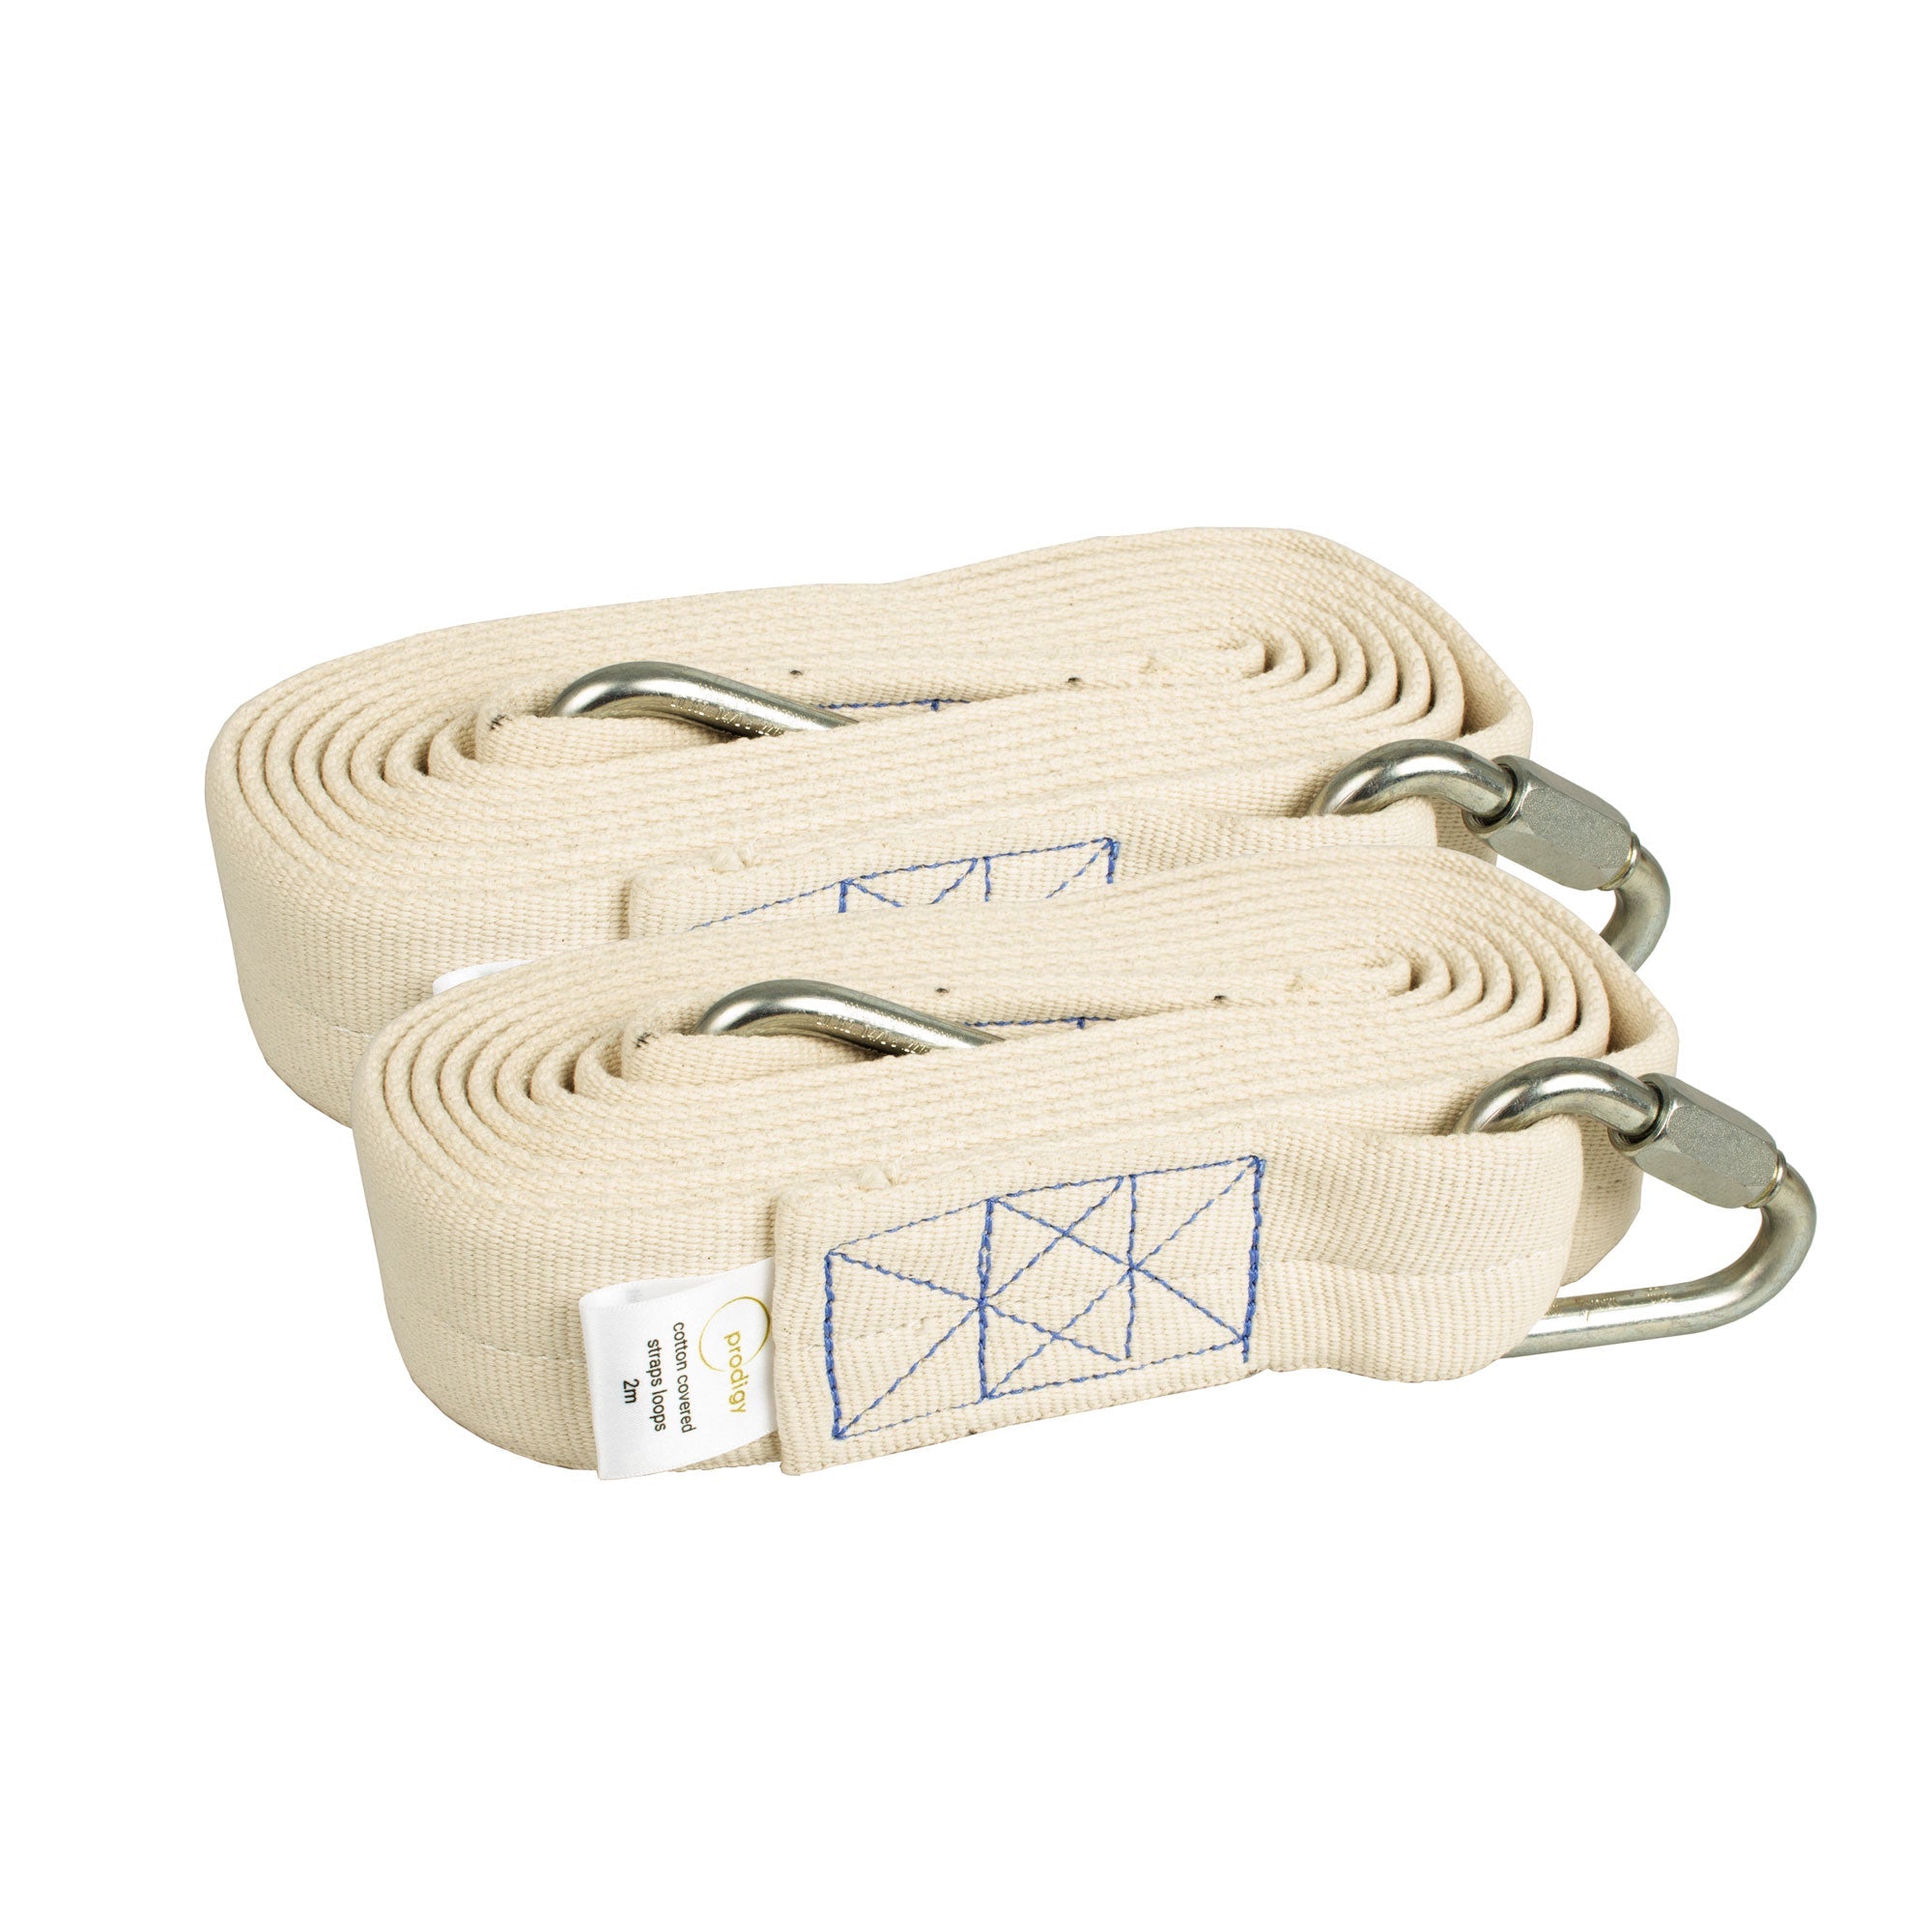 Prodigy cotton covered aerial loops - 200cm coiled up